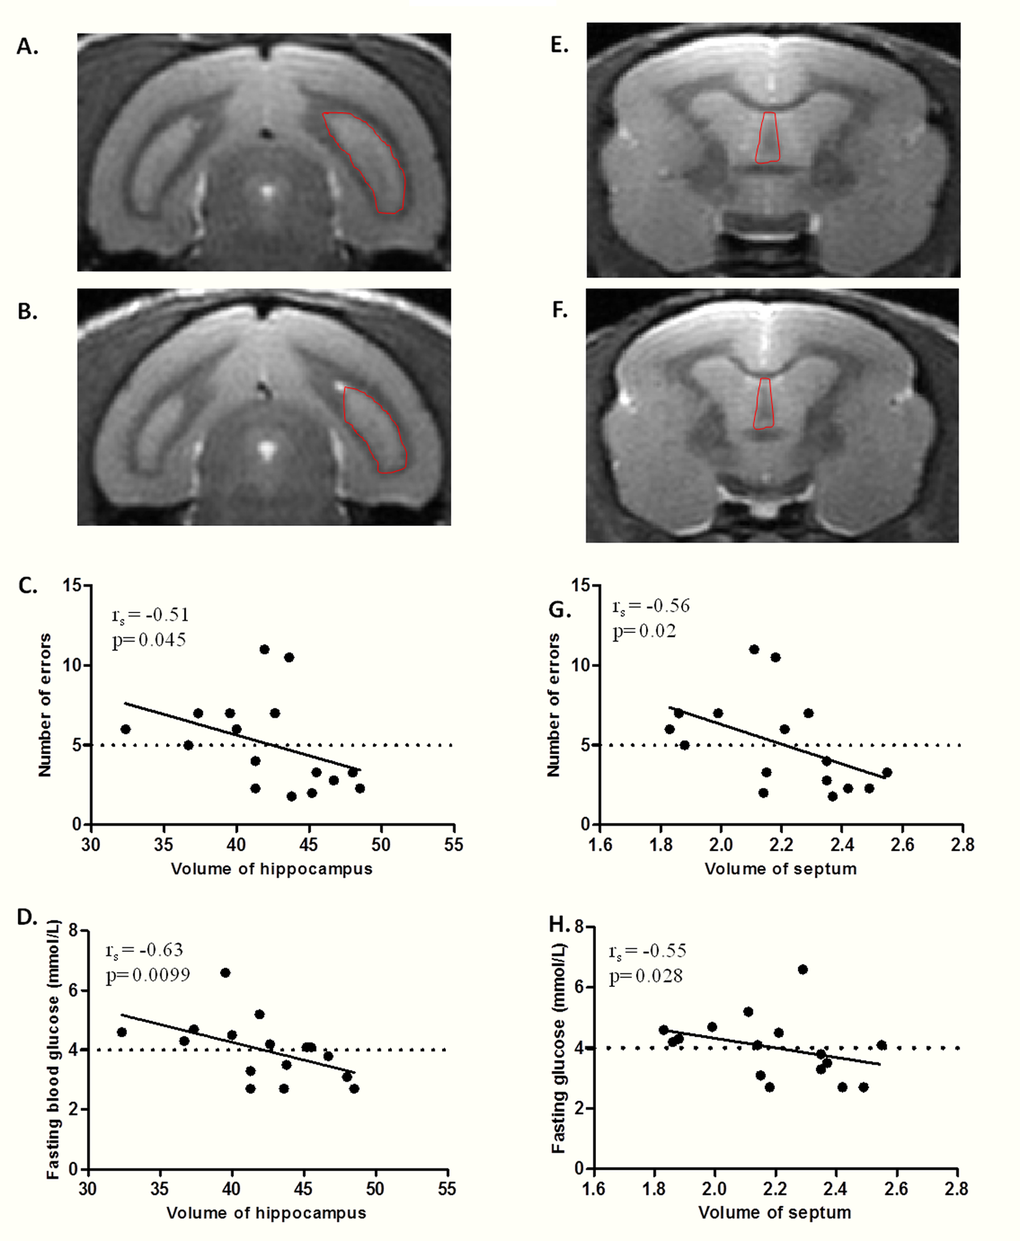 Relationship between fasting blood glucose, hippocampus/septum volume, and spatial memory performance in middle-aged lemurs. (A-B) MRI coronal sections of hippocampus (right hippocampus outlined by dotted line) in a non atrophied middle-aged (A) and an atrophied middle-aged (B) mouse lemurs. (C) Spearman correlation between number of errors and hippocampus volume. (D) Spearman correlation between fasting blood glucose and hippocampus volume. (E-F) MRI coronal sections of septum (outlined by dotted line) in a non atrophied middle-aged (E) and an atrophied middle-aged (F) animals. (G) Spearman correlation between number of errors and septum volume. (H) Spearman correlation between fasting blood glucose and septum volume.